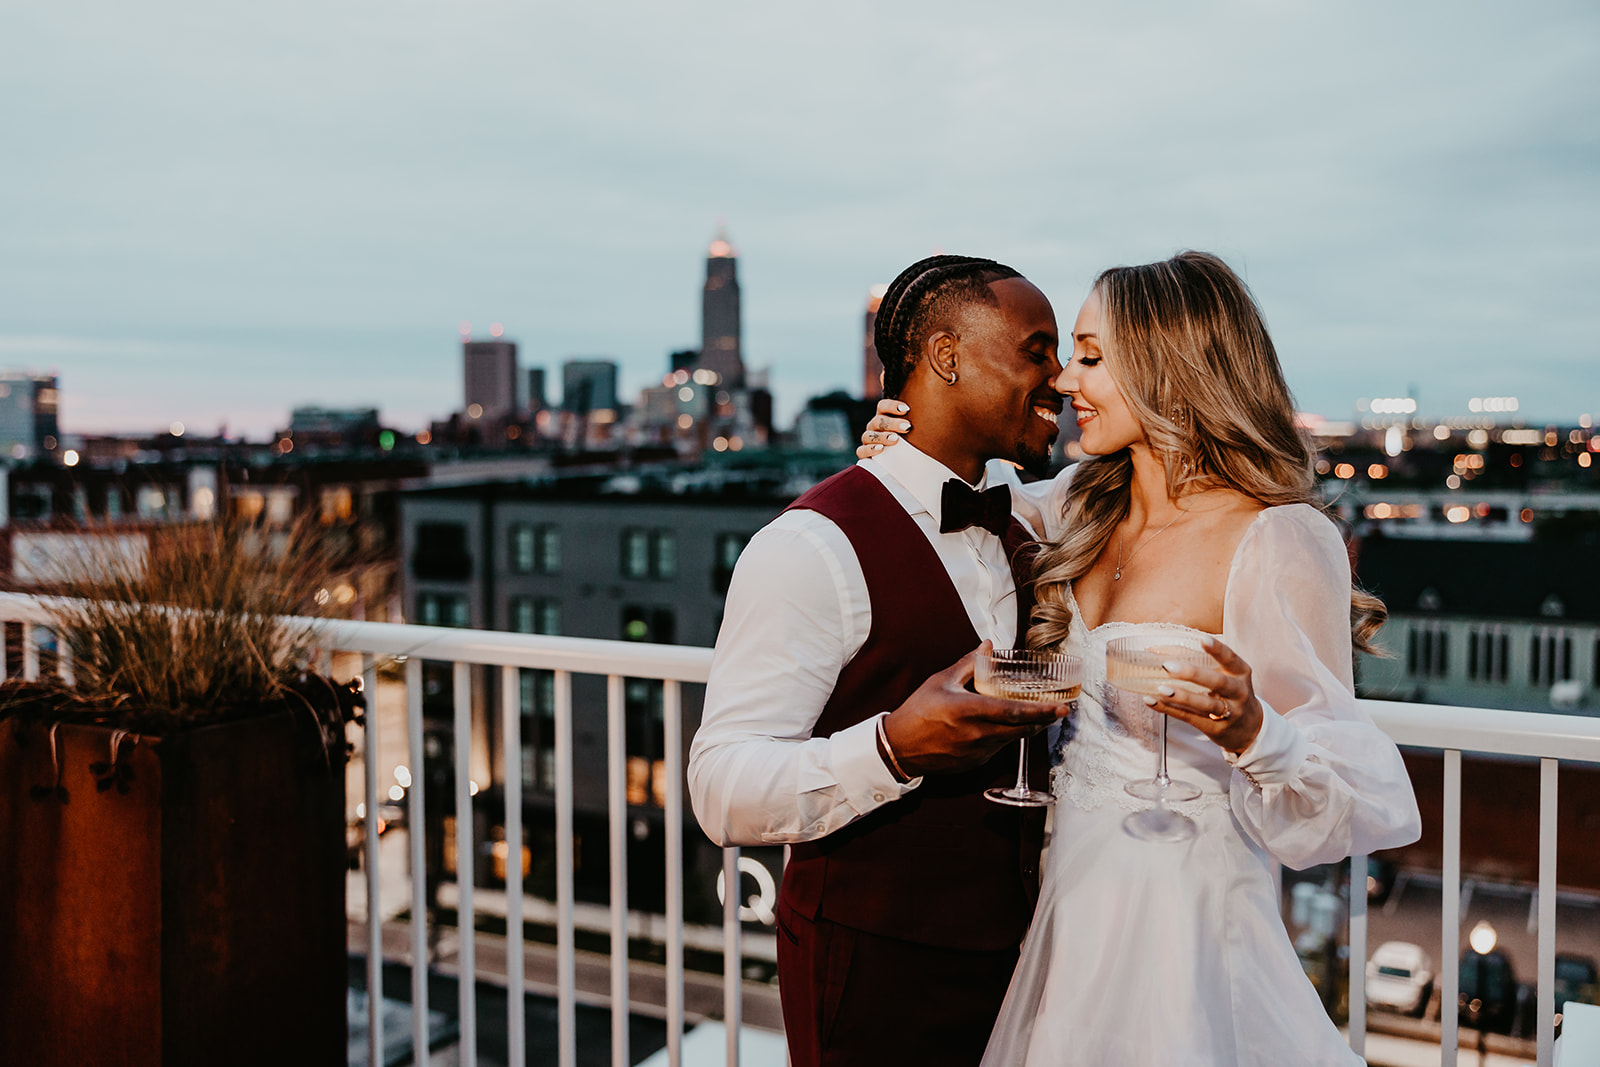 Candid shots of happy newlyweds at The Lantern Room in Cleveland, Ohio - preserving the genuine emotions of the day.